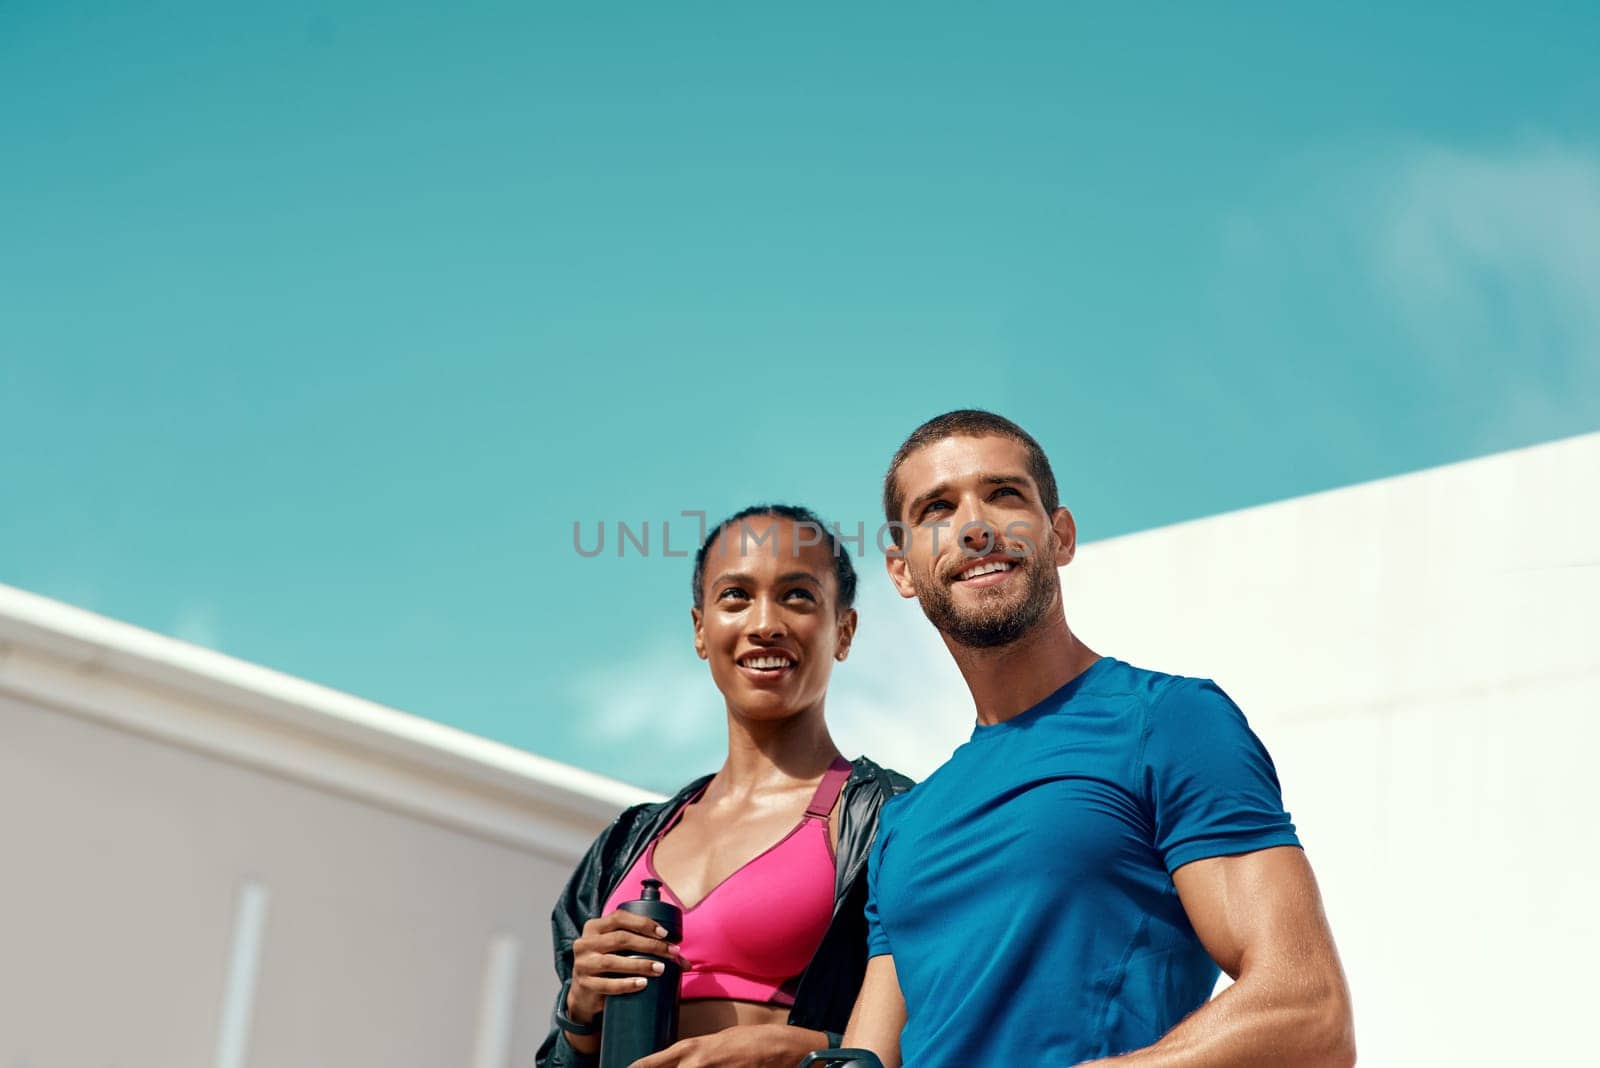 People, fitness and outdoor in sportswear for exercise, training or workout with blue sky. Personal trainer, man and woman together ready for thinking, gym and physical activity for summer body by YuriArcurs